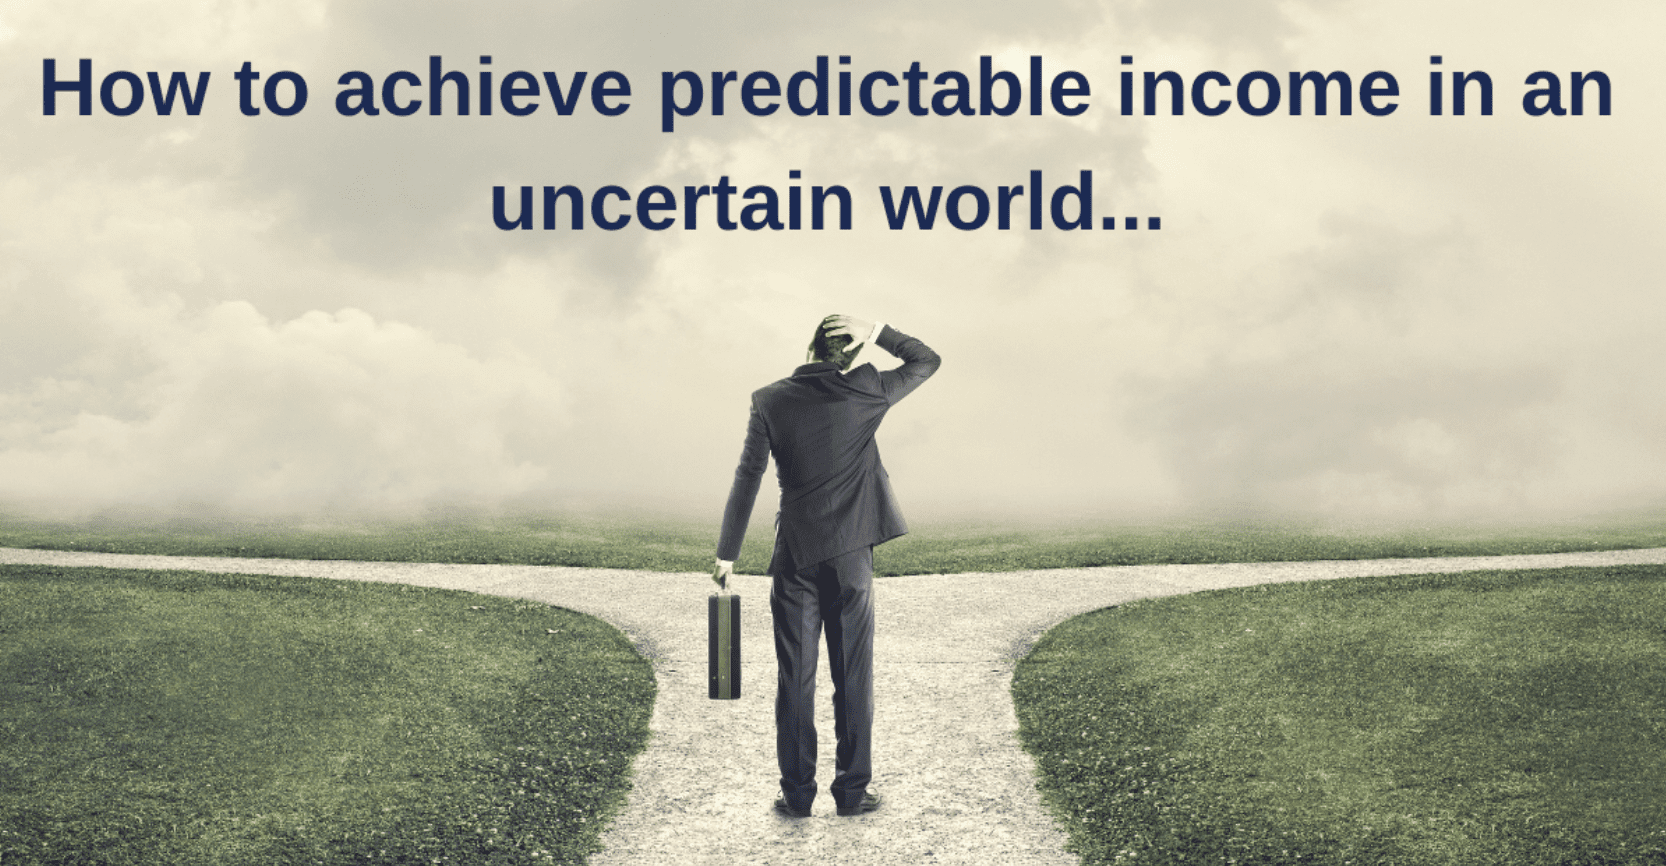 Predictable income in an uncertain world